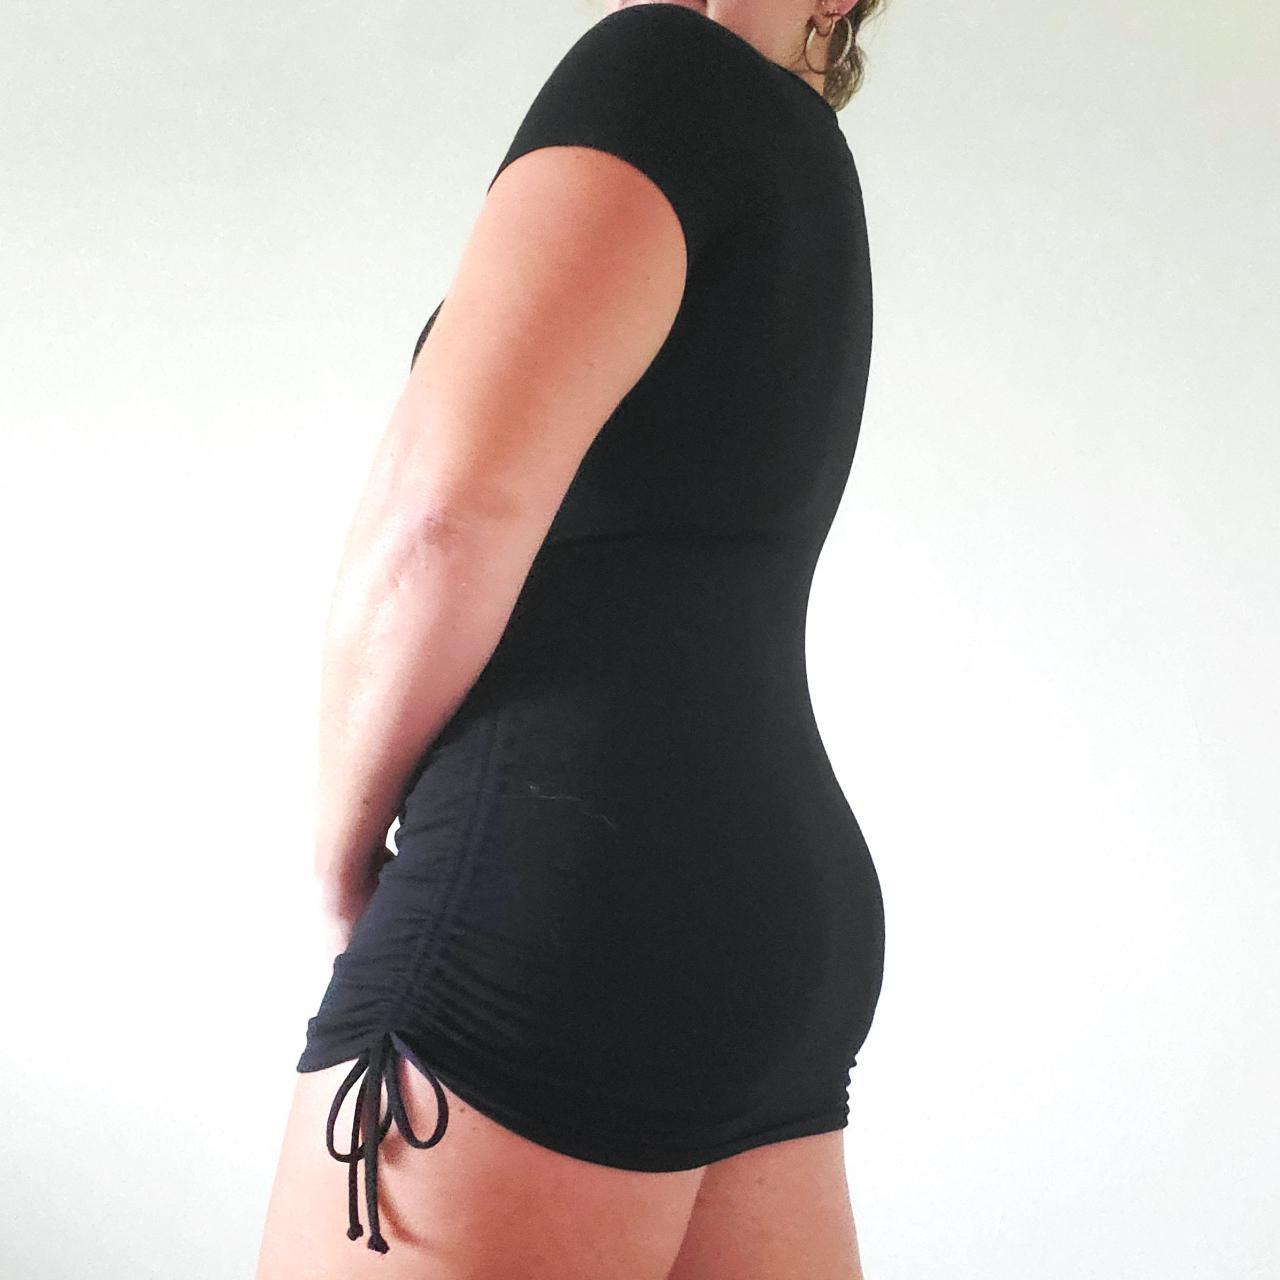 Product Image 2 - Simple black dress with side